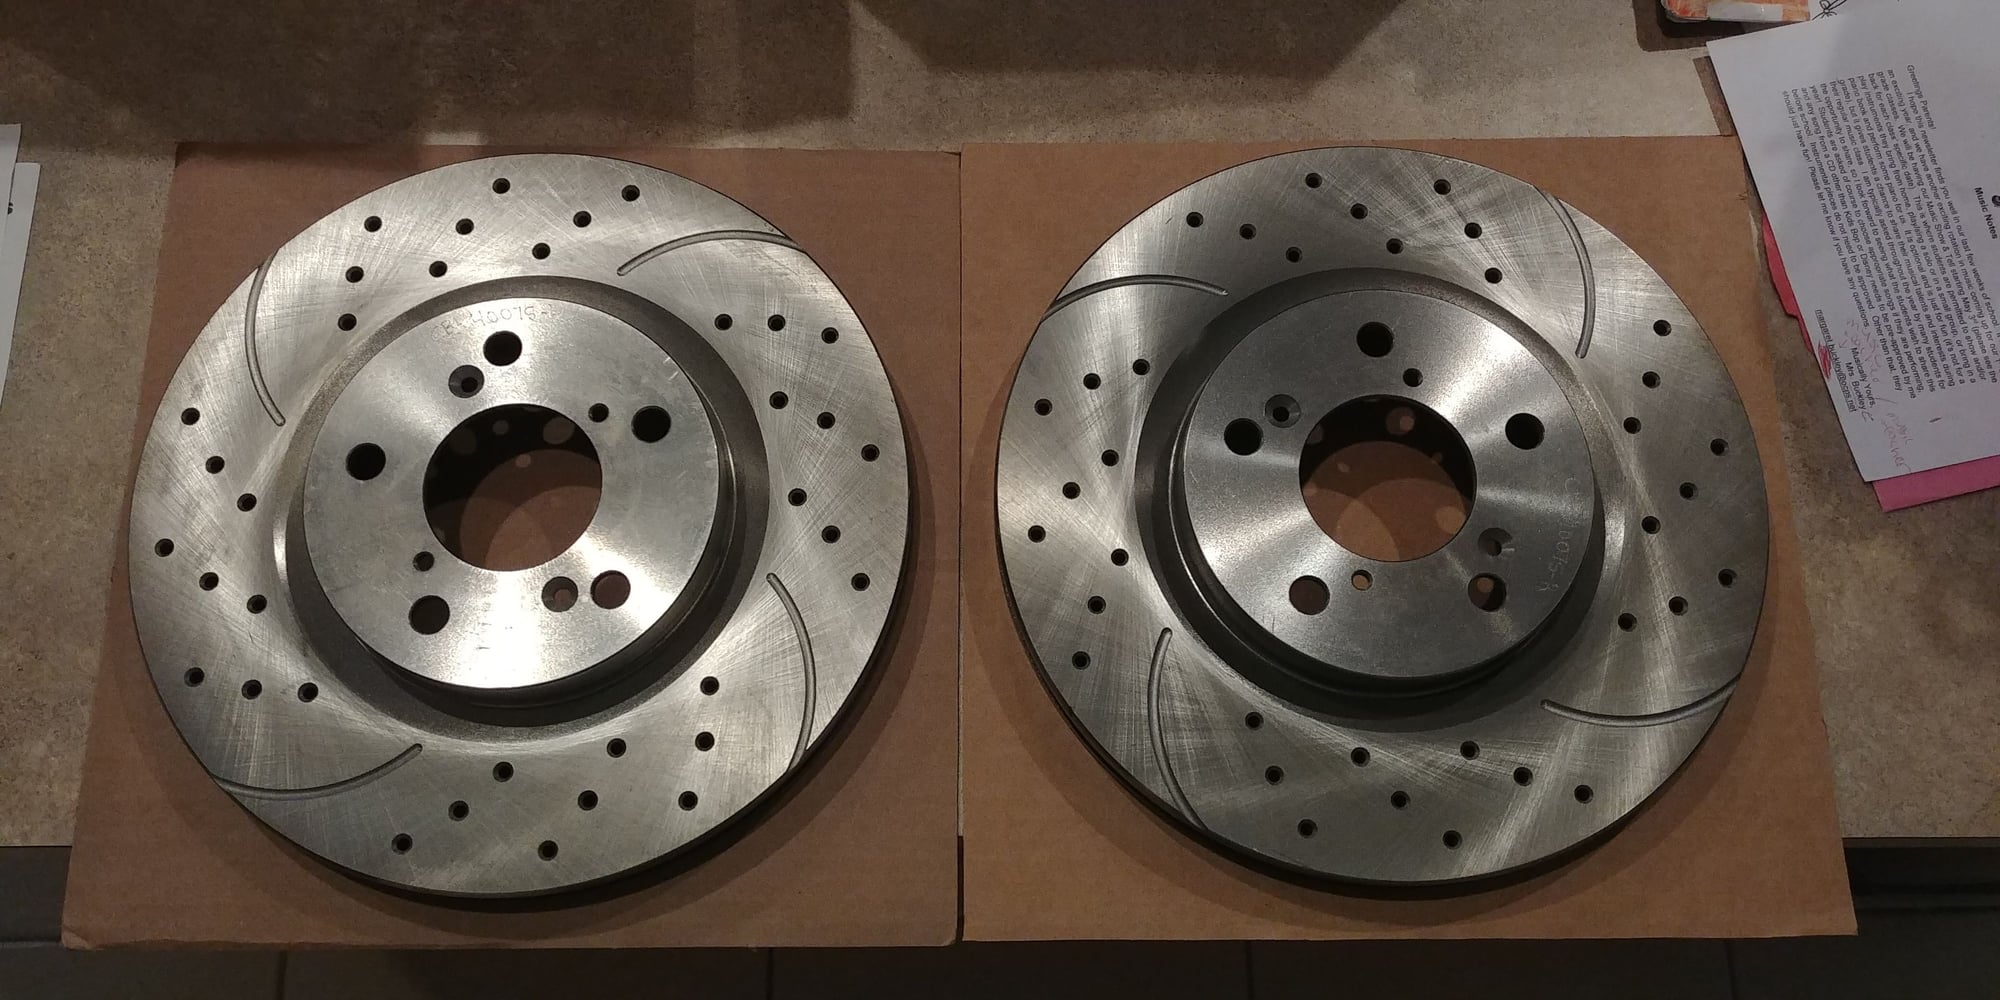 Brakes - FS: Drilled / Slotted Rotors (Brand New) - 4G TL - New - 2009 to 2014 Acura TL - Orlando, FL 32824, United States